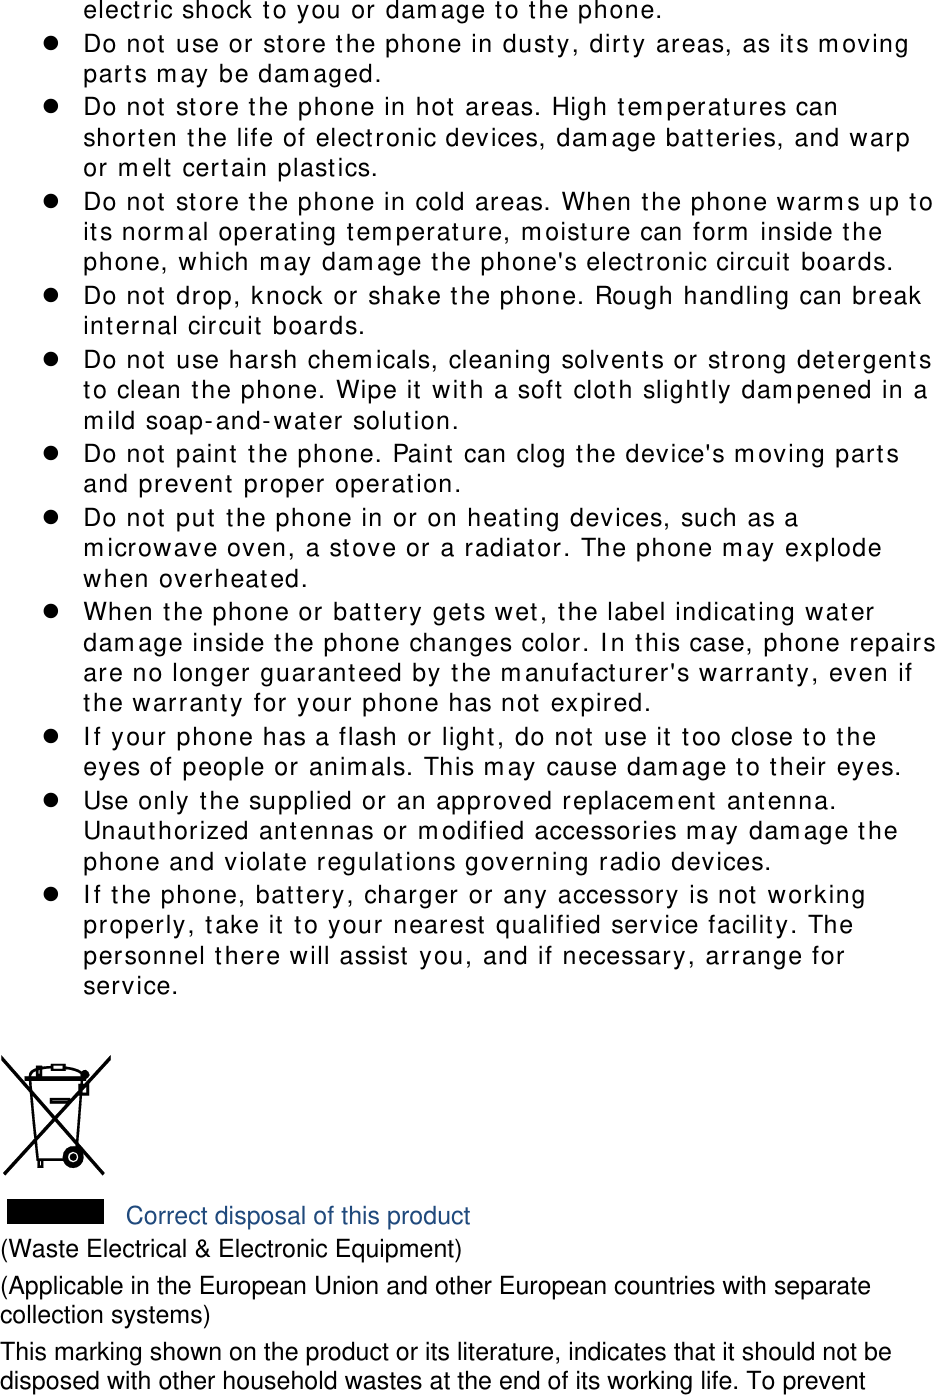 electric shock to you or damage to the phone. z Do not use or store the phone in dusty, dirty areas, as its moving parts may be damaged. z Do not store the phone in hot areas. High temperatures can shorten the life of electronic devices, damage batteries, and warp or melt certain plastics. z Do not store the phone in cold areas. When the phone warms up to its normal operating temperature, moisture can form inside the phone, which may damage the phone&apos;s electronic circuit boards. z Do not drop, knock or shake the phone. Rough handling can break internal circuit boards. z Do not use harsh chemicals, cleaning solvents or strong detergents to clean the phone. Wipe it with a soft cloth slightly dampened in a mild soap-and-water solution. z Do not paint the phone. Paint can clog the device&apos;s moving parts and prevent proper operation. z Do not put the phone in or on heating devices, such as a microwave oven, a stove or a radiator. The phone may explode when overheated. z When the phone or battery gets wet, the label indicating water damage inside the phone changes color. In this case, phone repairs are no longer guaranteed by the manufacturer&apos;s warranty, even if the warranty for your phone has not expired.  z If your phone has a flash or light, do not use it too close to the eyes of people or animals. This may cause damage to their eyes. z Use only the supplied or an approved replacement antenna. Unauthorized antennas or modified accessories may damage the phone and violate regulations governing radio devices. z If the phone, battery, charger or any accessory is not working properly, take it to your nearest qualified service facility. The personnel there will assist you, and if necessary, arrange for service.   Correct disposal of this product (Waste Electrical &amp; Electronic Equipment) (Applicable in the European Union and other European countries with separate collection systems) This marking shown on the product or its literature, indicates that it should not be disposed with other household wastes at the end of its working life. To prevent 